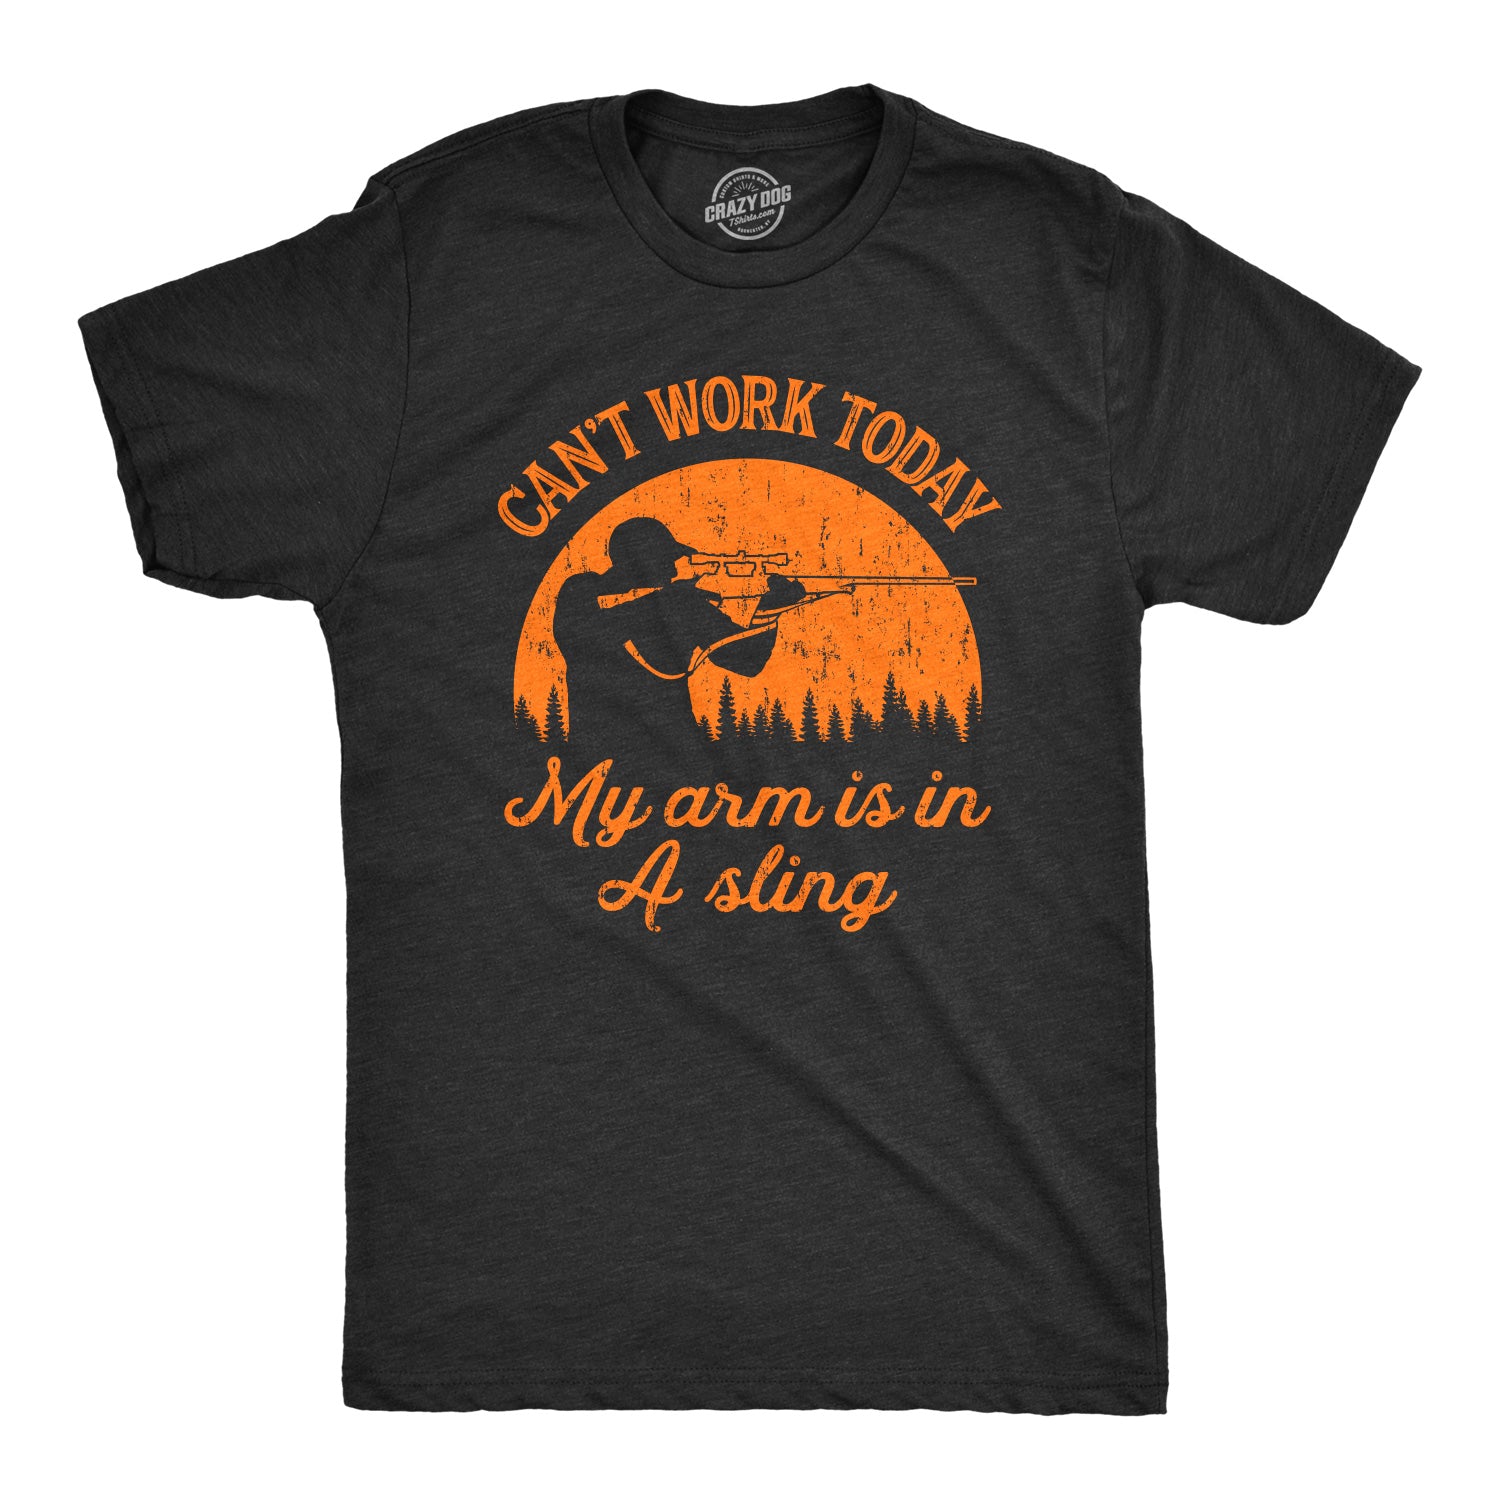 Funny Heather Black Can't Work Today My Arm Is In A Sling Mens T Shirt Nerdy Hunting Tee